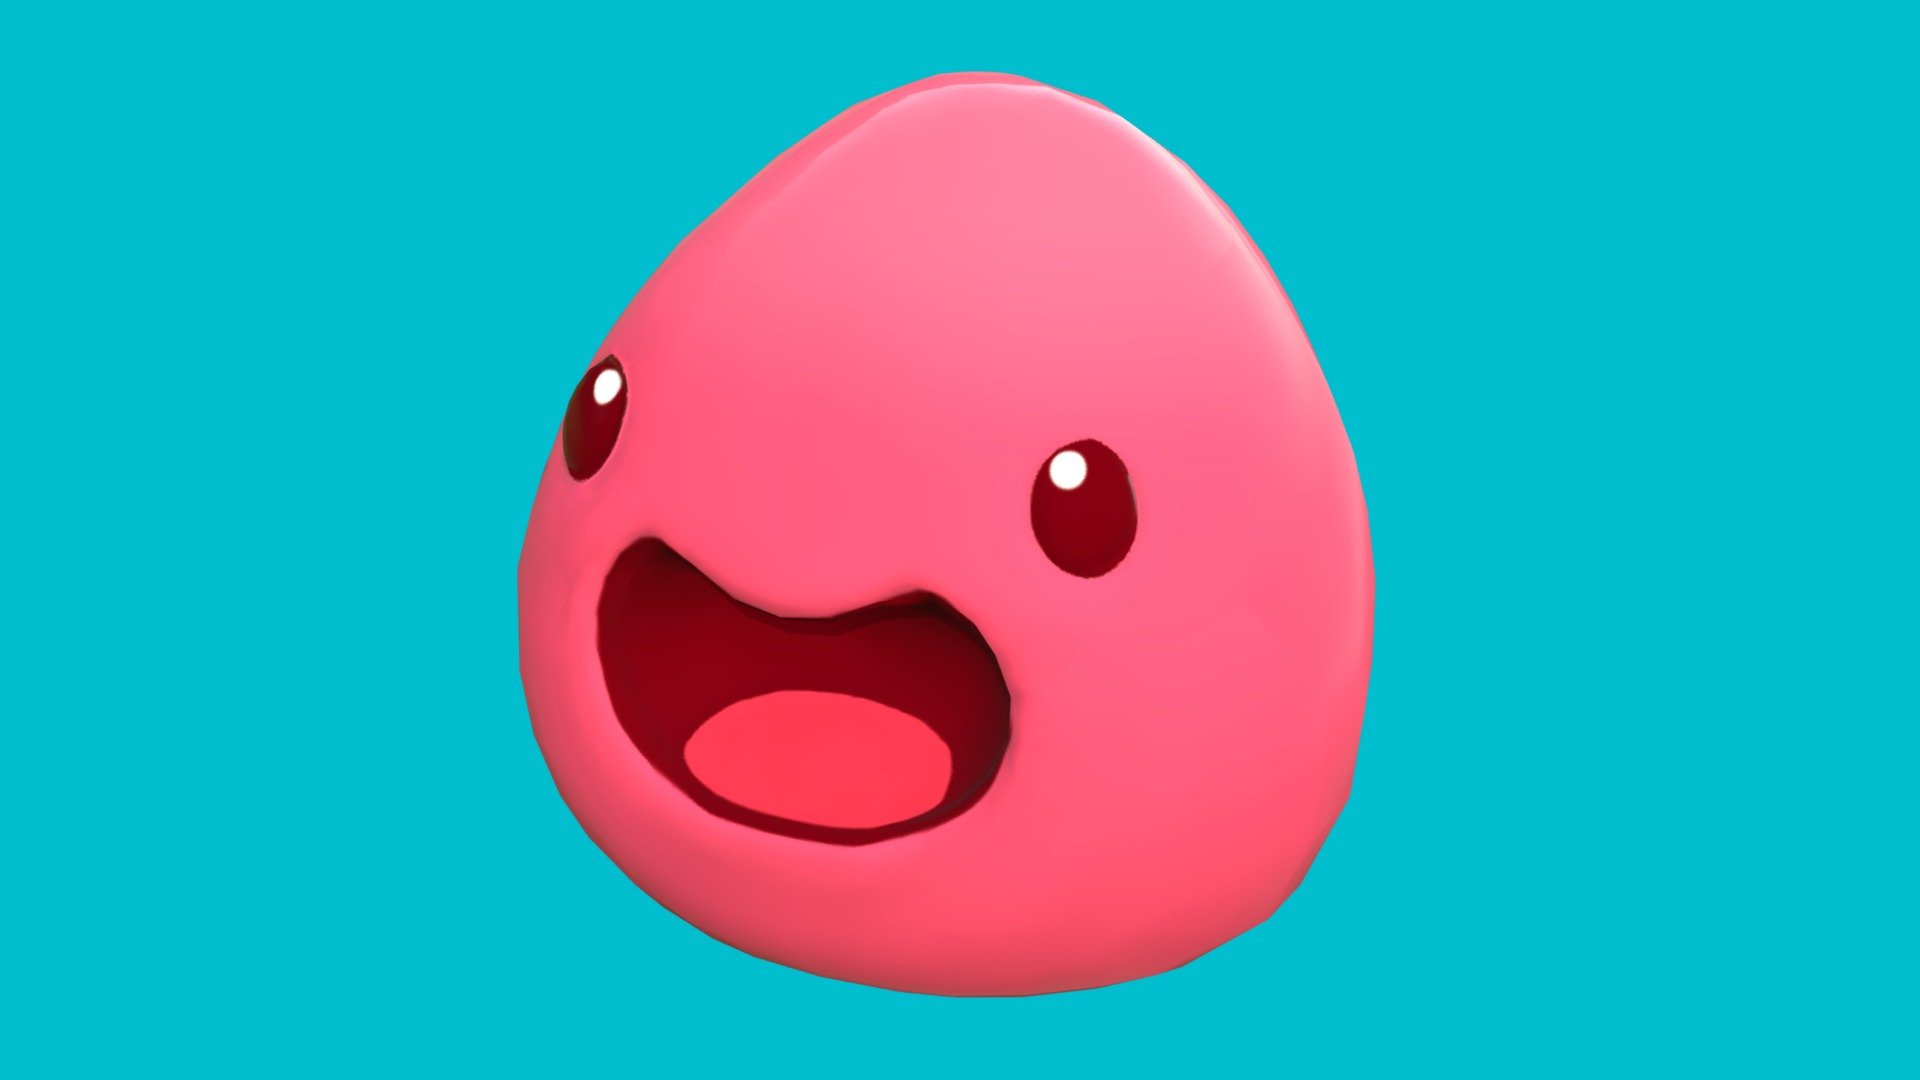 [On Tumblr] | [On DeviantArt]

Slimes from the game Slime Rancher make for such great 3D modeling practice.

I've made stuff in Sculptris before, but this is my first completed project for 3D Coat! It was troubleshooting galore, but that's about what I was expecting for my first try.

He sadly lost his glossiness in the export, so you're going to have to use your imagination. :') - [Slime Rancher] Pink Slime - 3D model by BlueBead 3d model